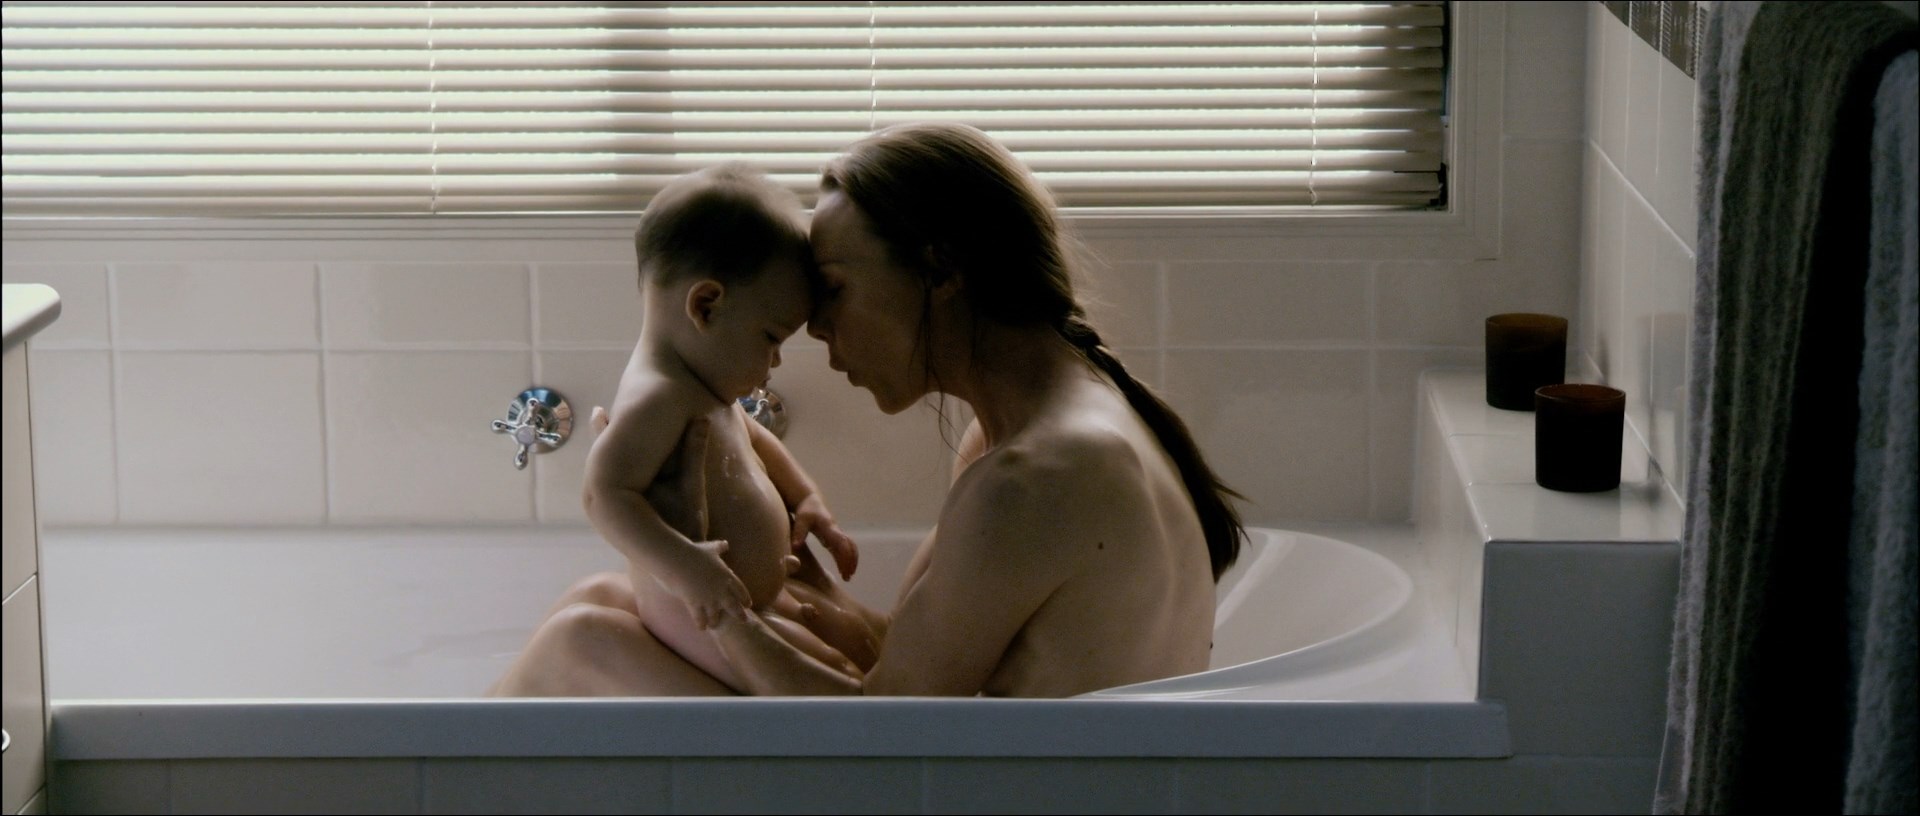 Belinda McClory is on a bathtub topless with little kid. 